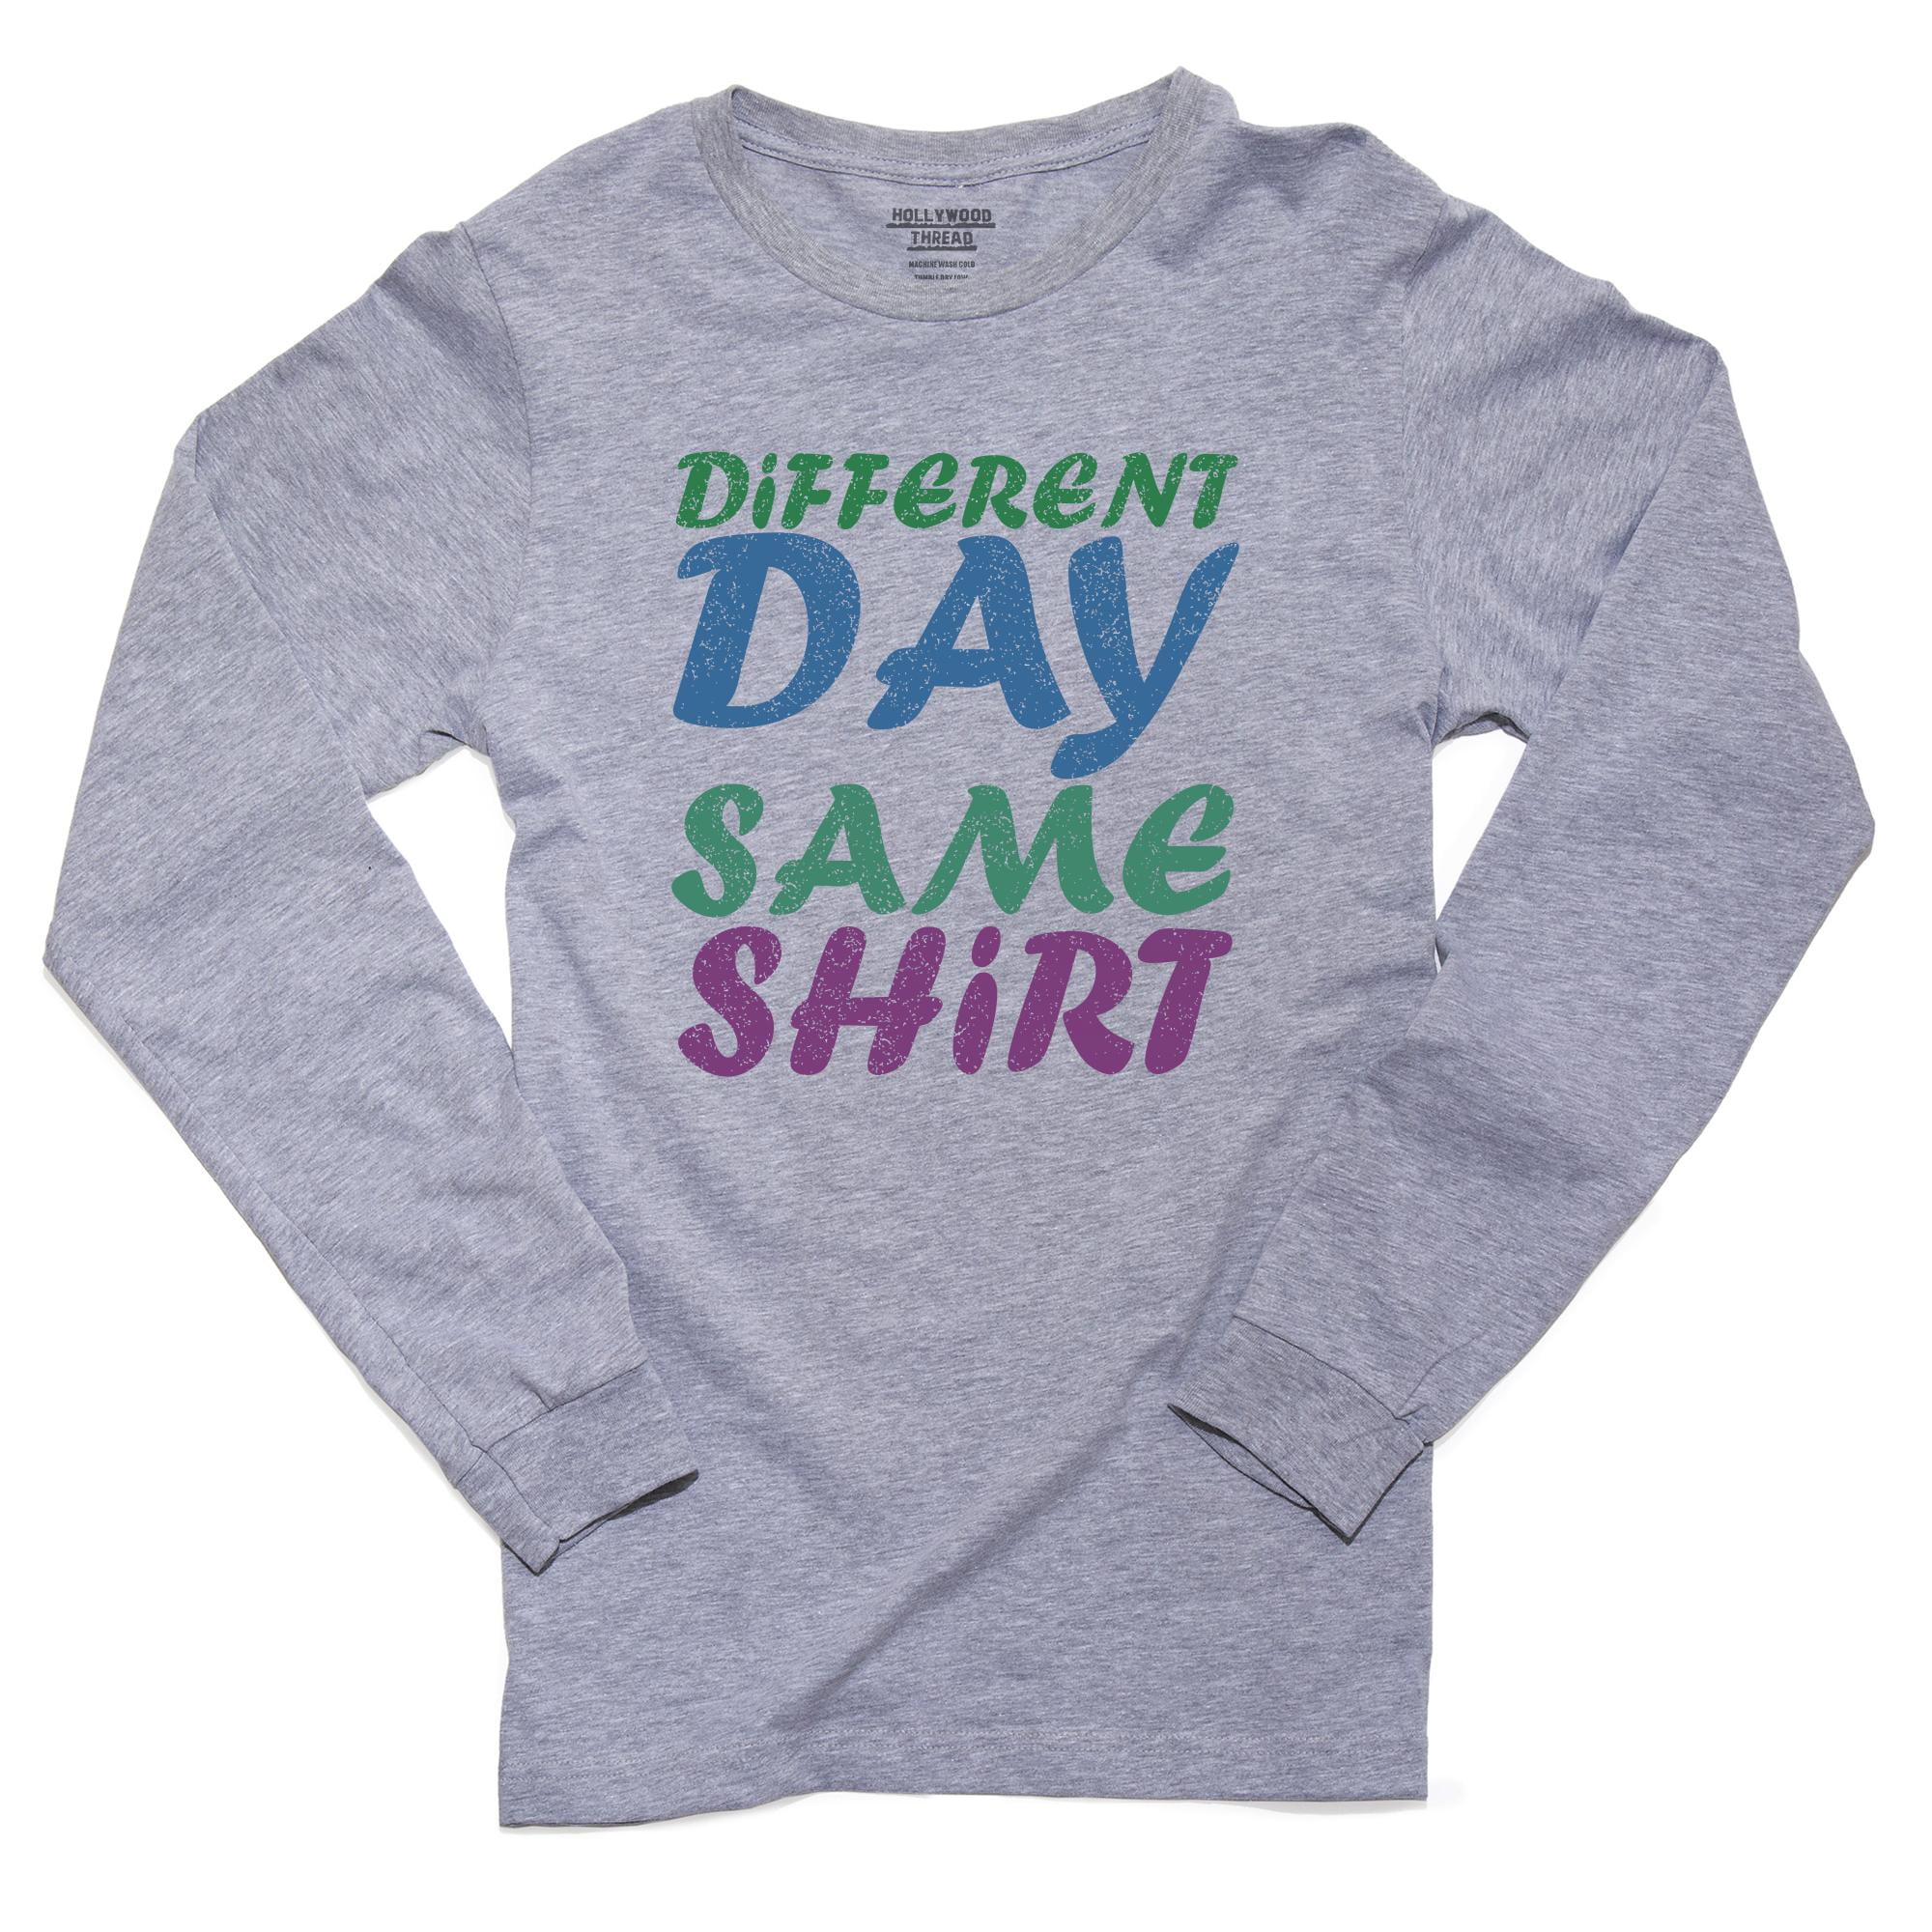 Different Day Same Shirt - Funny Play on Words Men's Long Sleeve Grey  T-Shirt 